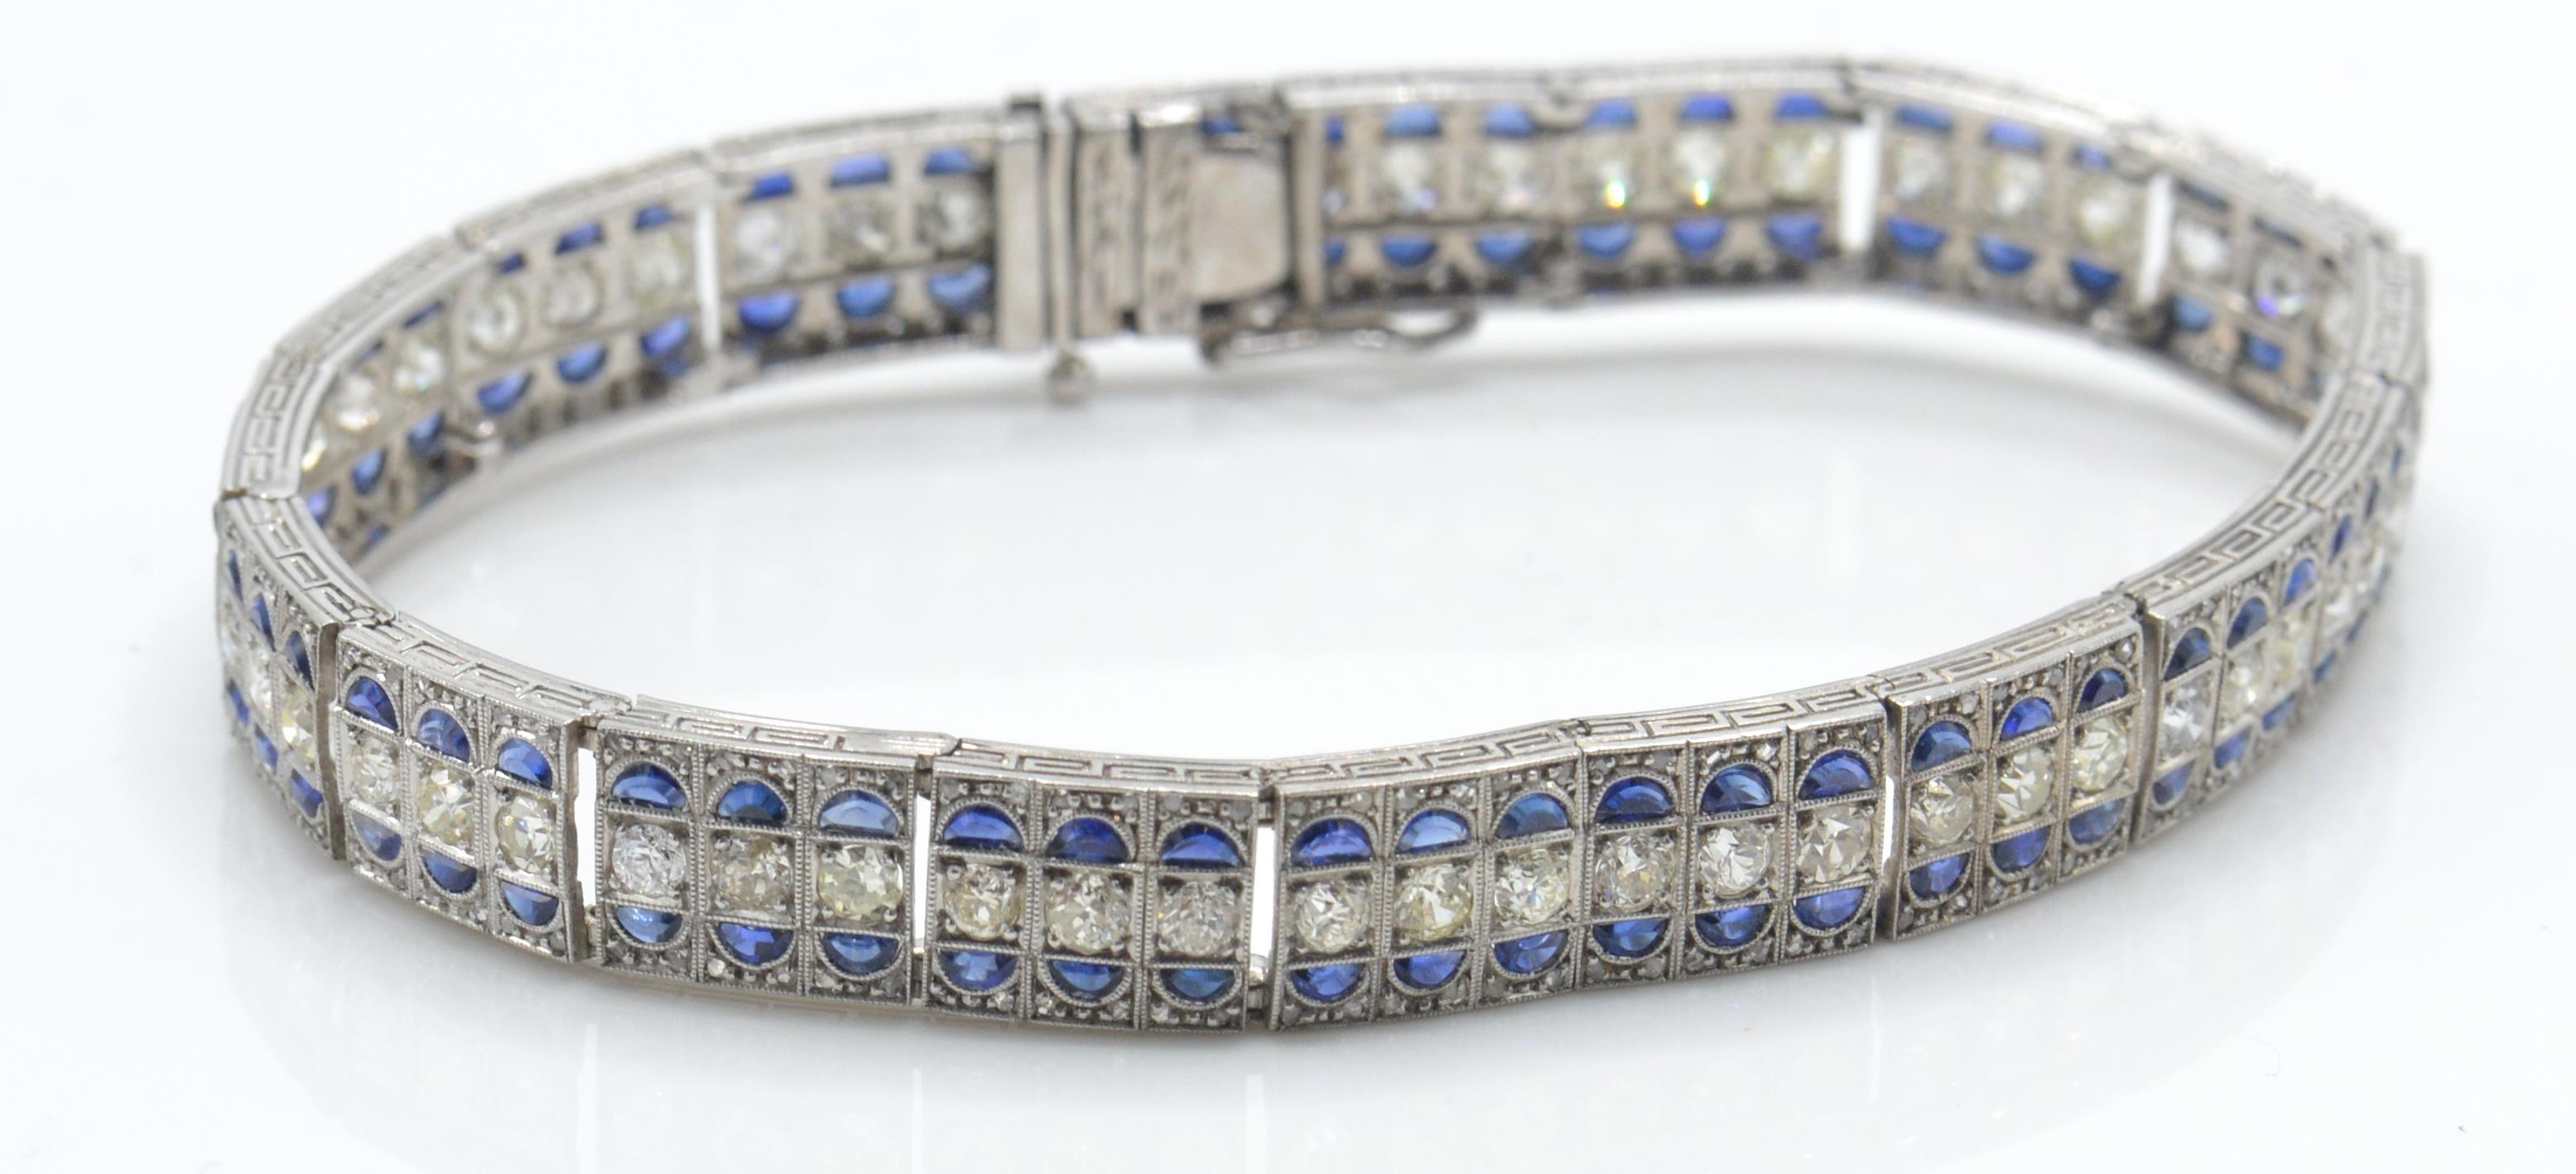 An 18t gold sapphire and diamond bracelet - Image 5 of 9